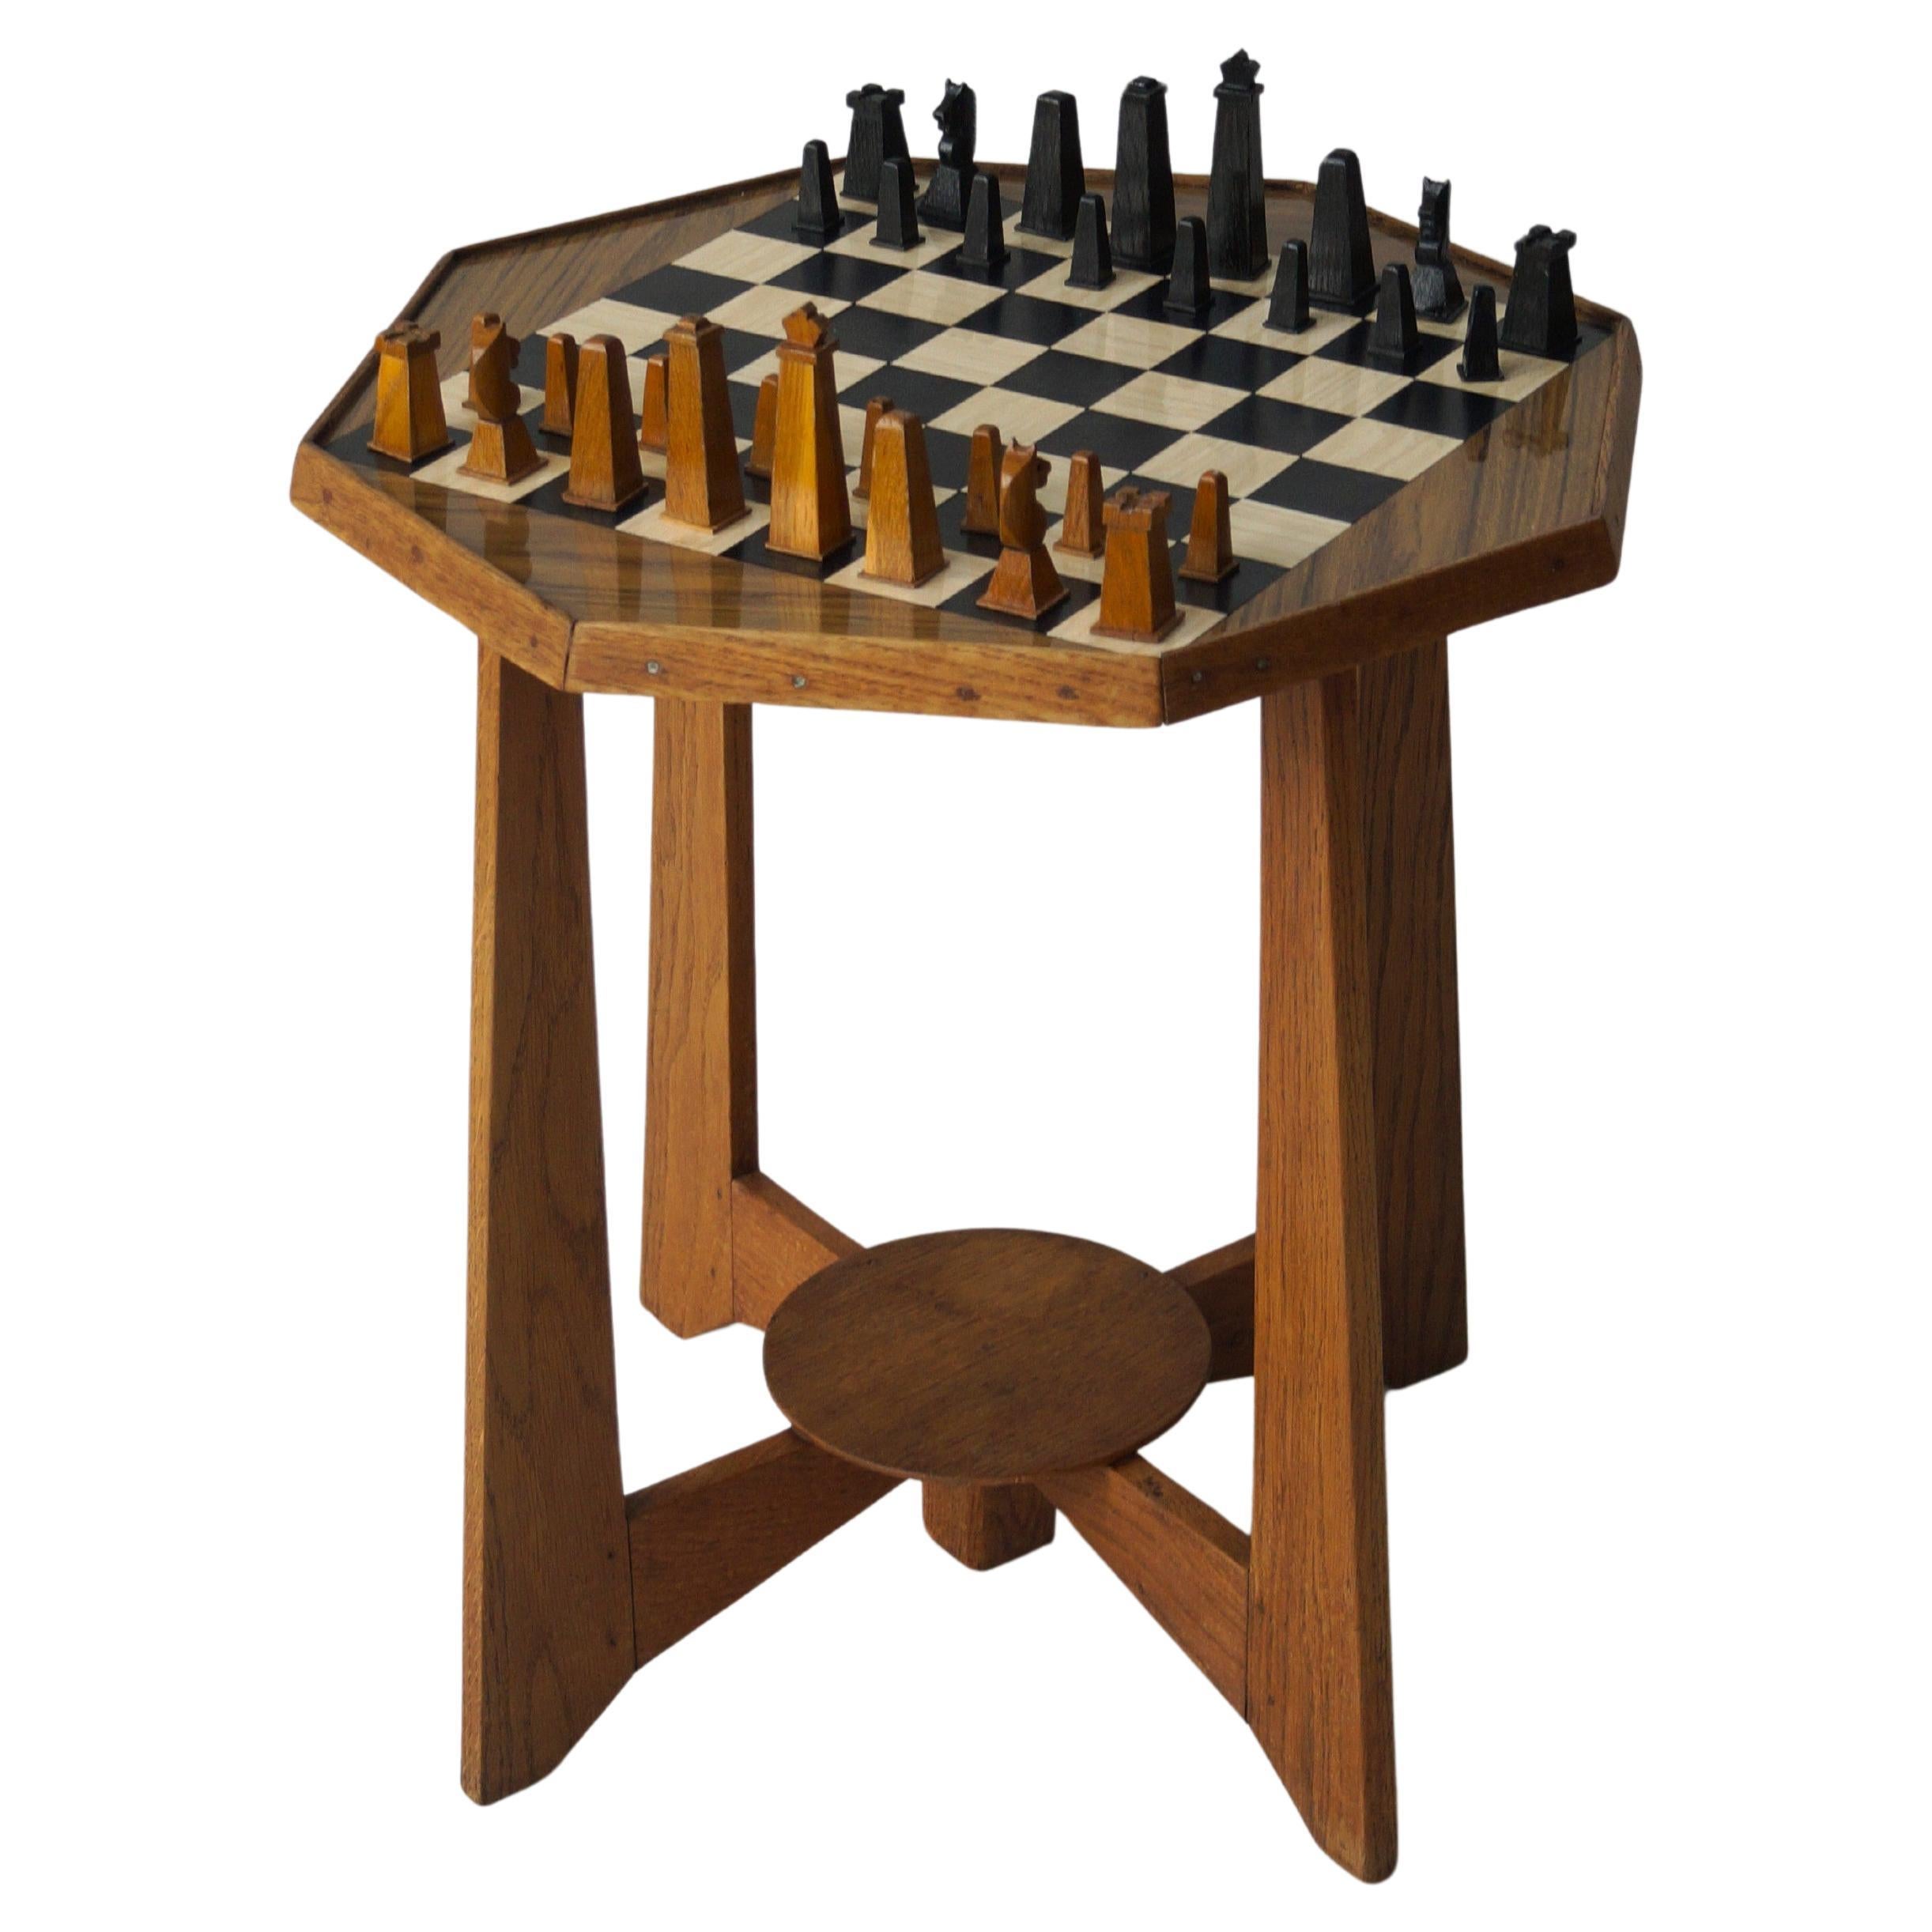 Dutch Art Deco octagonal chess table and chess set, ca. 1950s